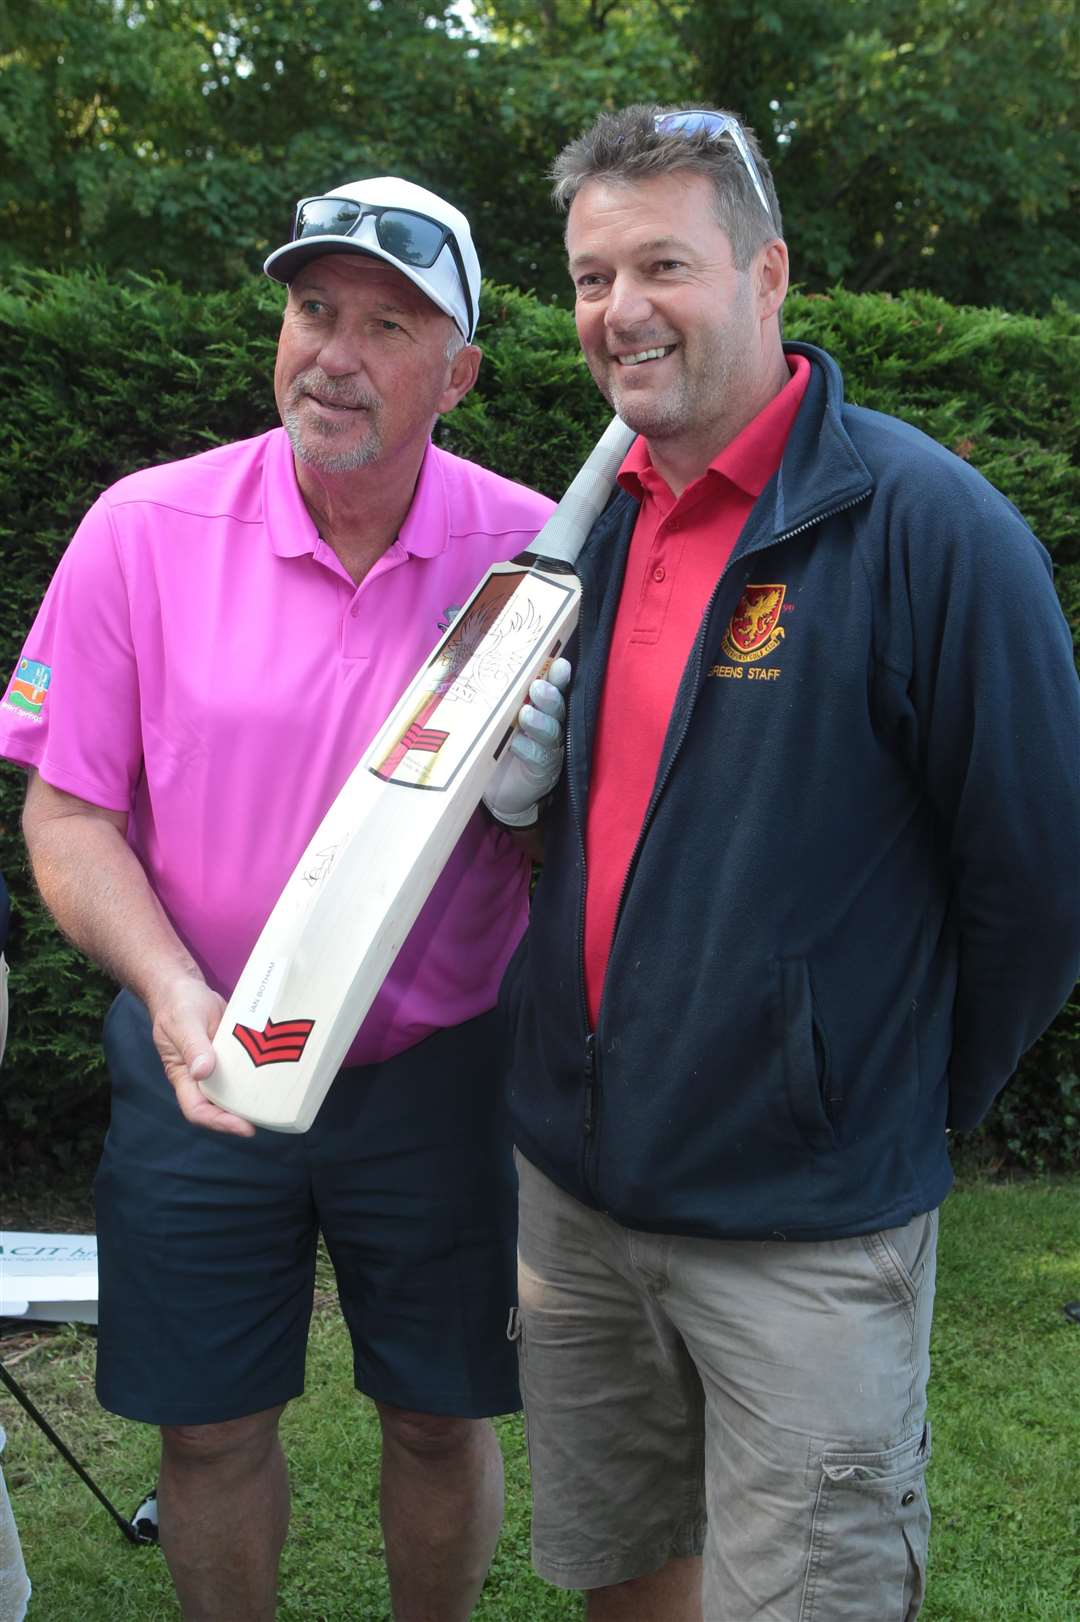 Ian Botham with a signed cricket bat that Gary Sargent, standing with him, made at Lamberhurst Golf course where Botham and Johnston were flown in to play one round of golf at the 18th hole to raise money for charity. Picture by: John Westhrop (2422768)